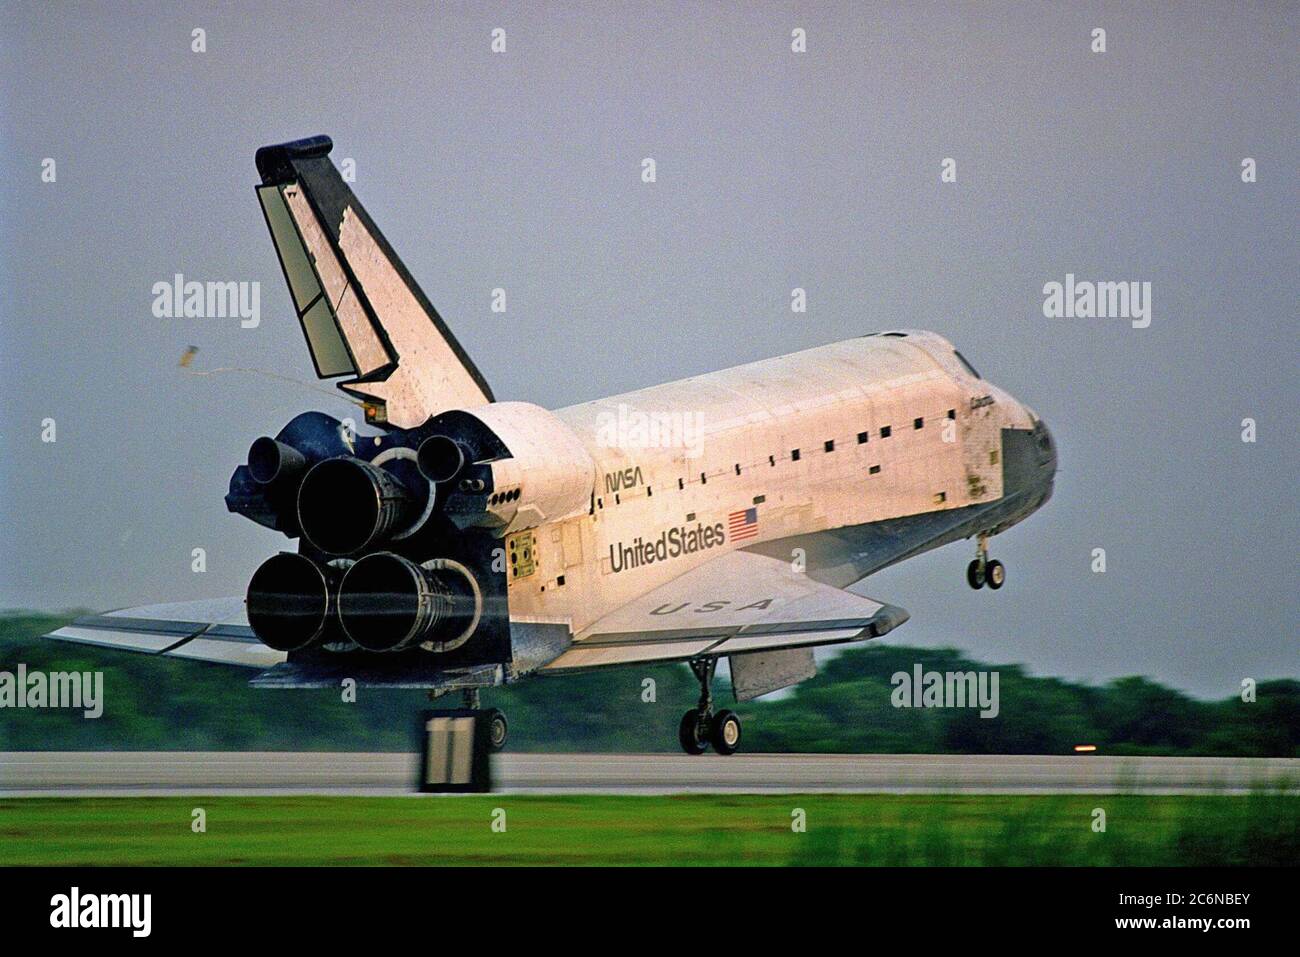 KENNEDY SPACE CENTER, FLA. -- The Space Shuttle orbiter Columbia touches  down on Runway 33 at KSC’s Shuttle Landing Facility at 6:46:34 a.m. EDT with  Mission Commander  James D. Halsell Jr. and Pilot Susan L. Still at the controls to  complete the STS-94 mission. Also on board are Mission Specialist Donald A. Thomas,  Mission Specialist Michael L. Gernhardt, Payload Commander Janice Voss, and Payload  Specialists Roger K. Crouch and Gregory T. Linteris. Stock Photo